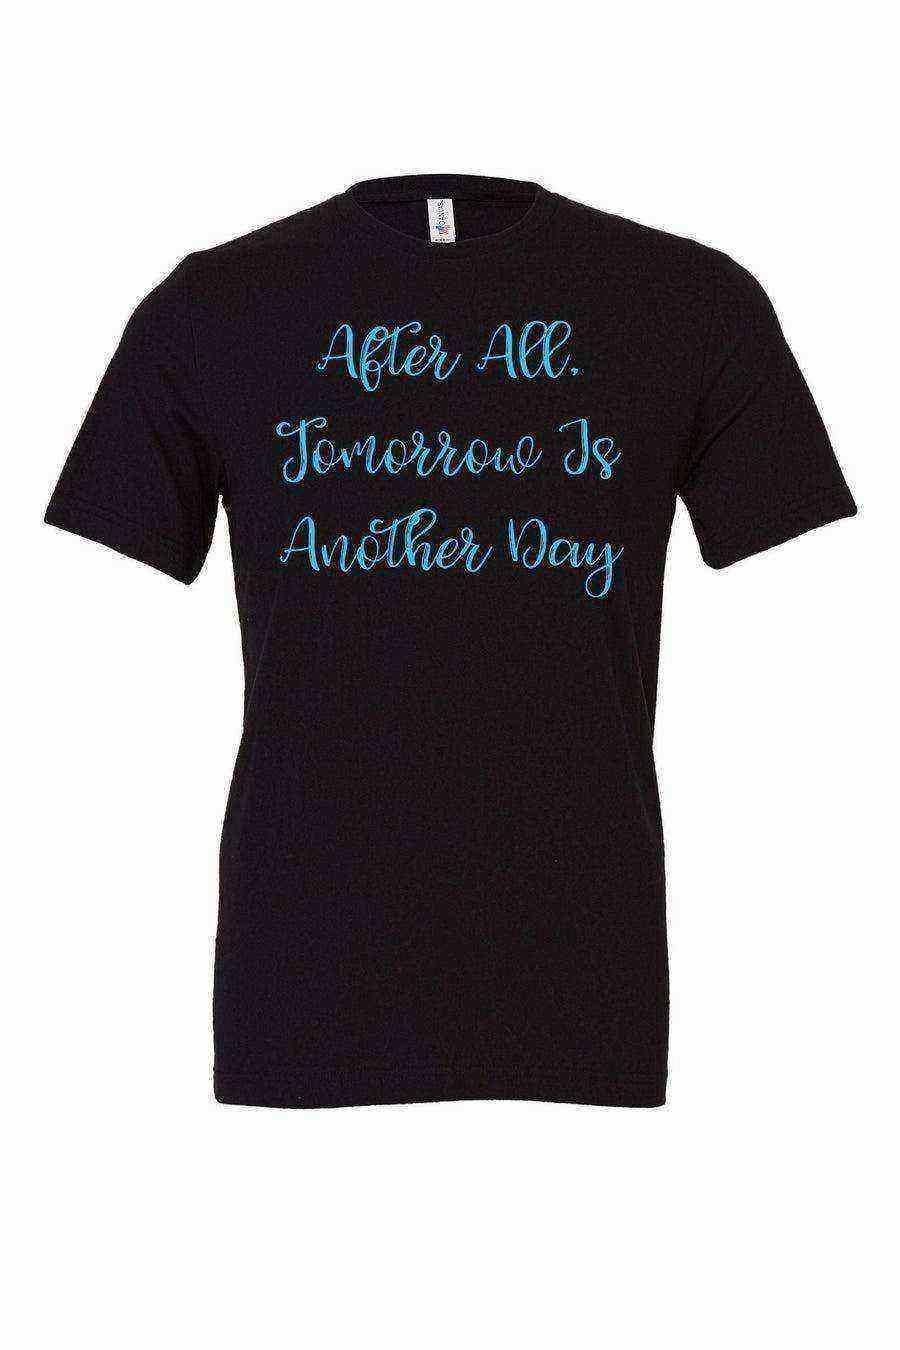 After All Tomorrow Is Another Day Shirt - Dylan's Tees